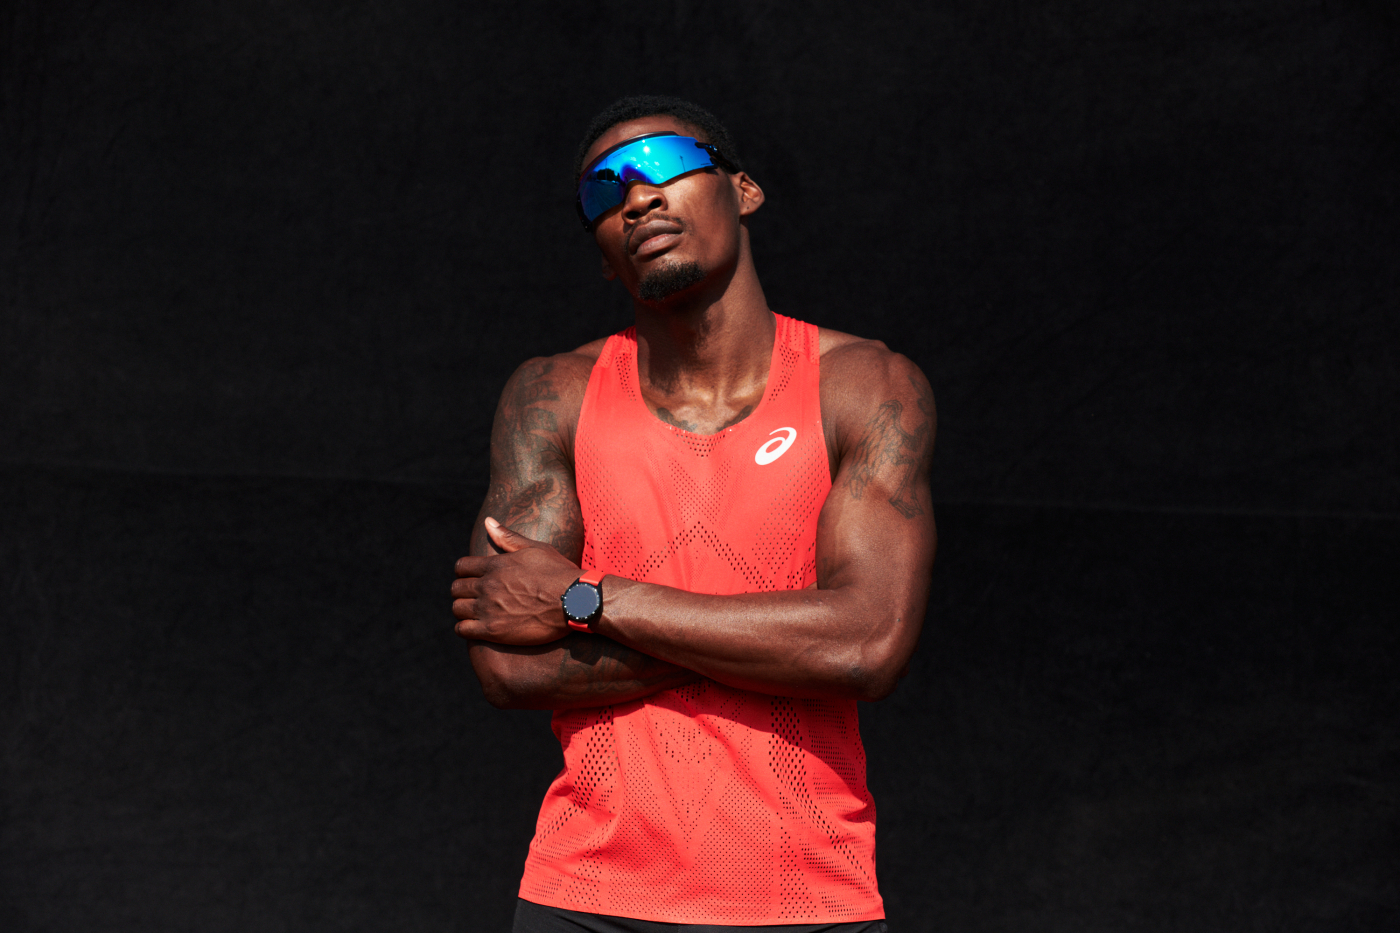 Tag Heuer campaign shot with athlete Fred Kerley by London based photographer Dominic Marley